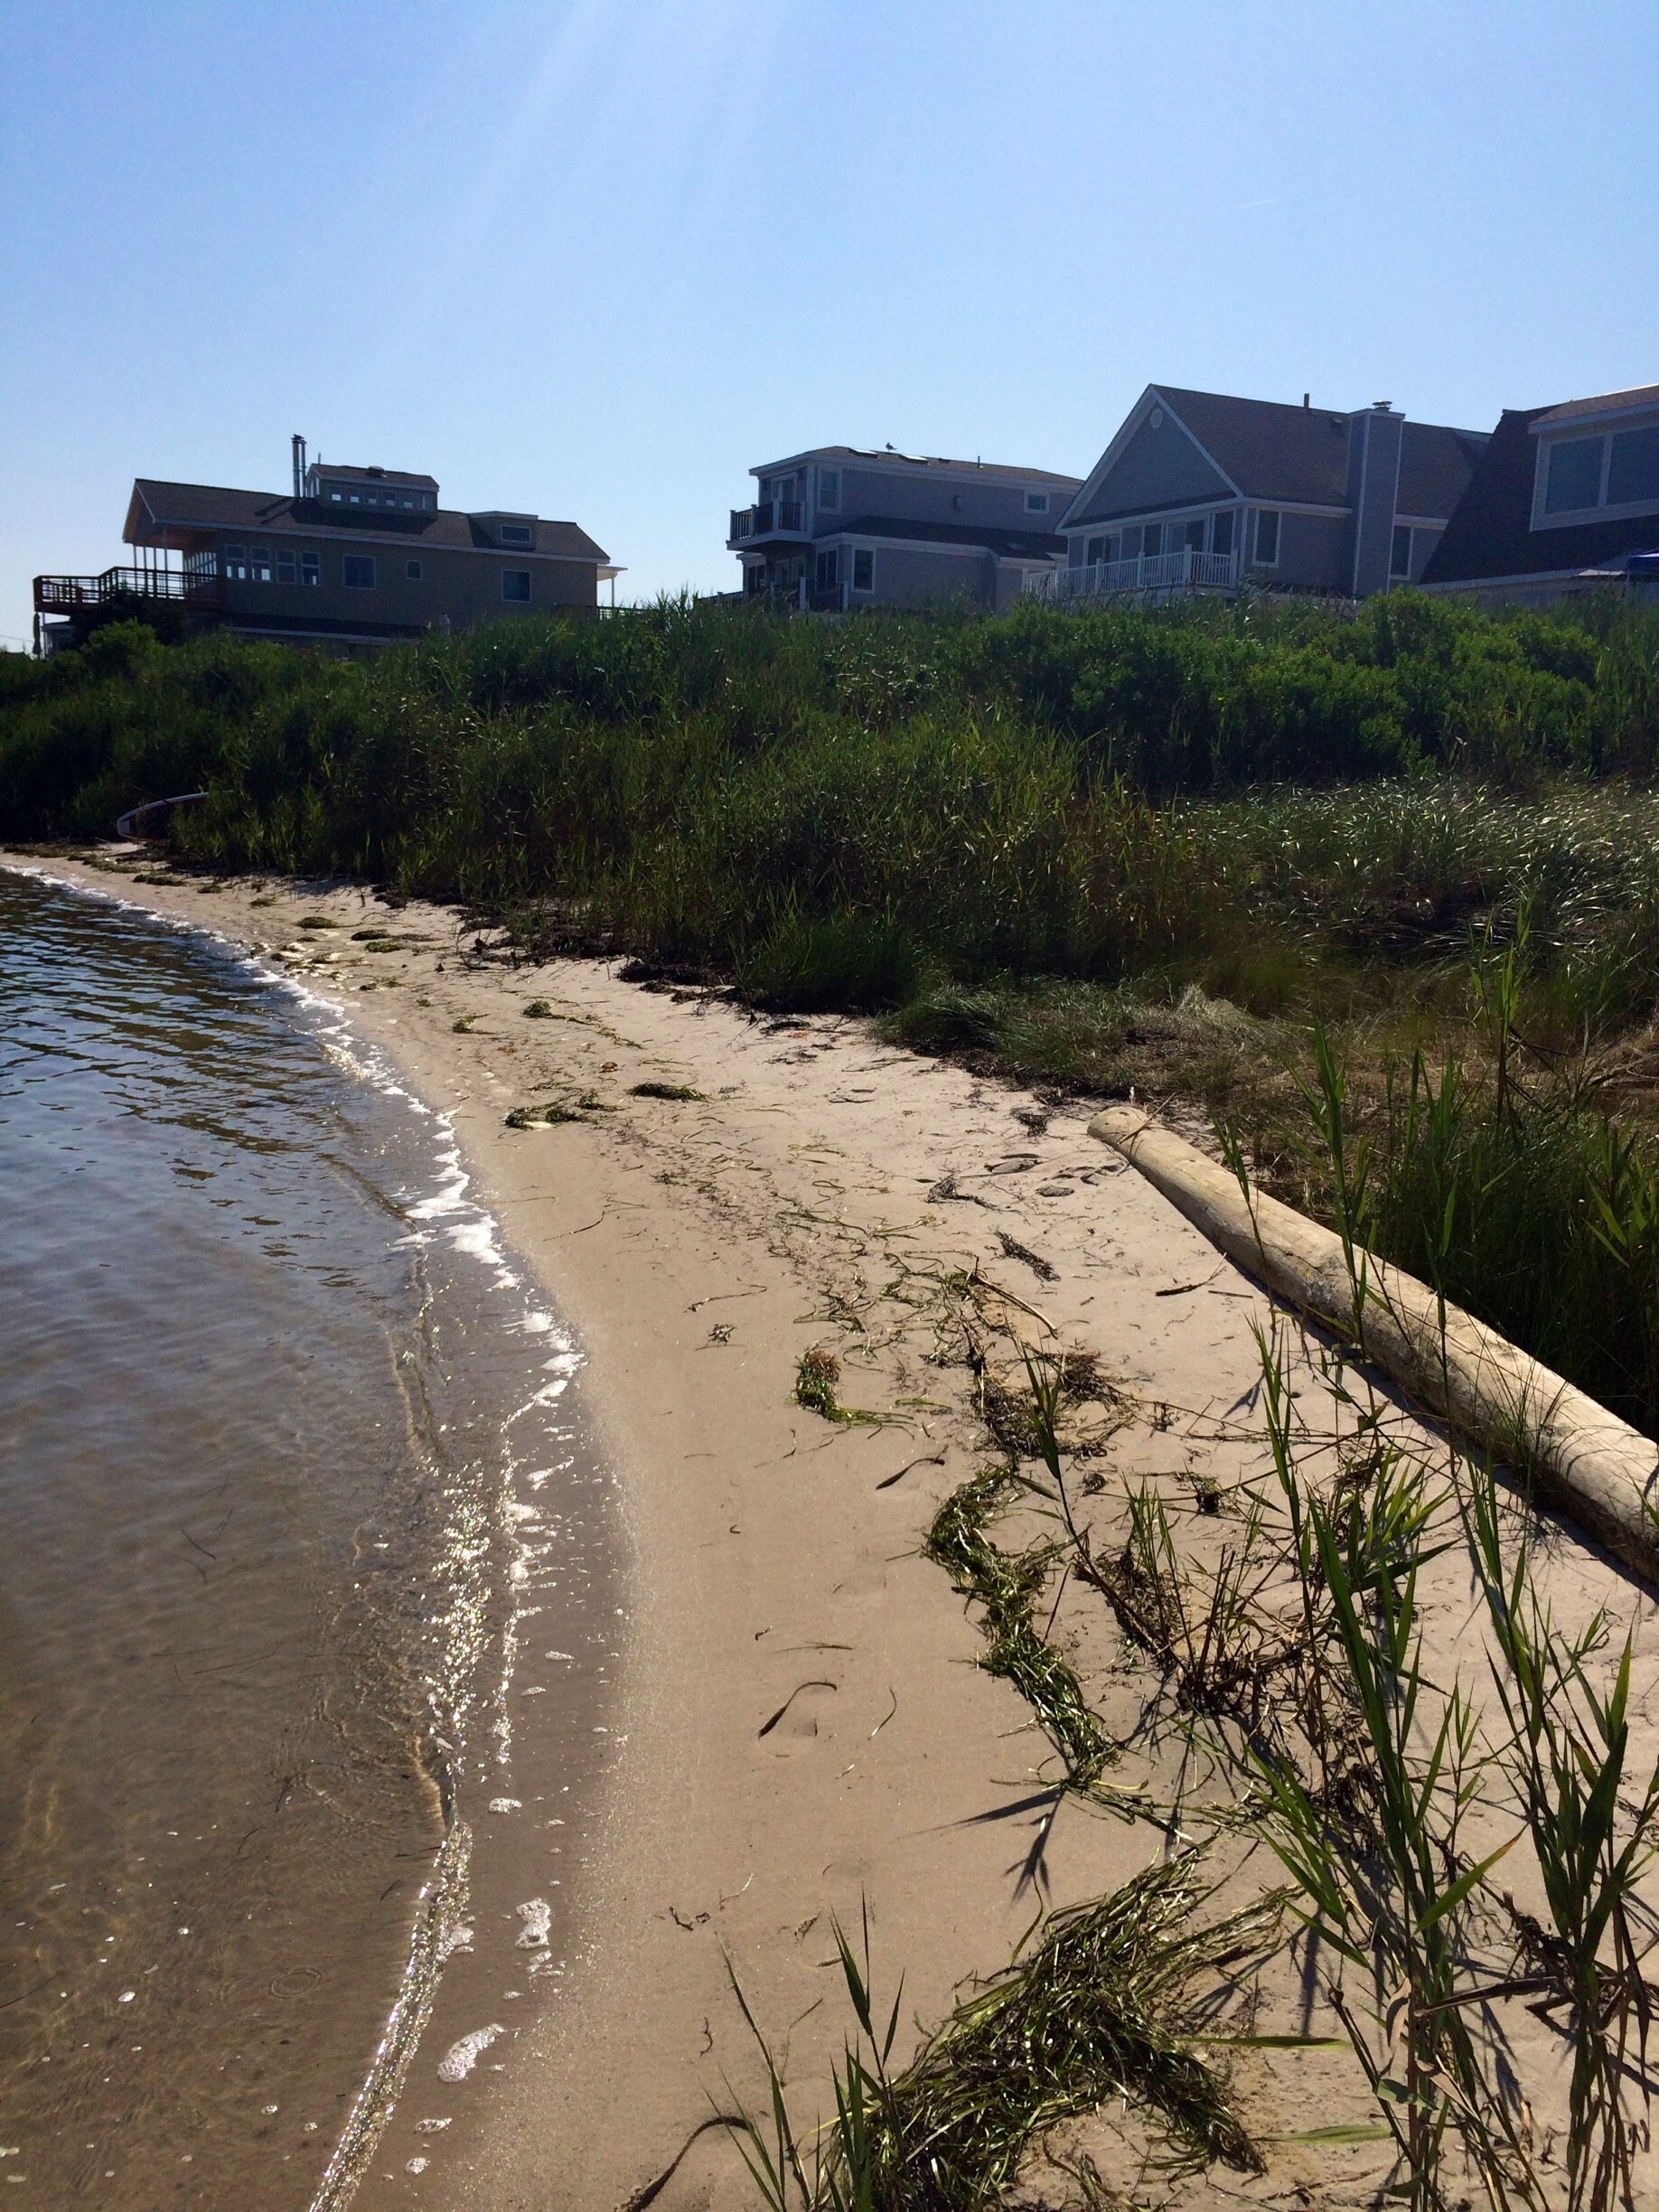 Massive mansions backing onto bay. Available to rent or house-share for the summer. Westhampton beach, slightly less costly than East or Southampton! But just as nice!! 